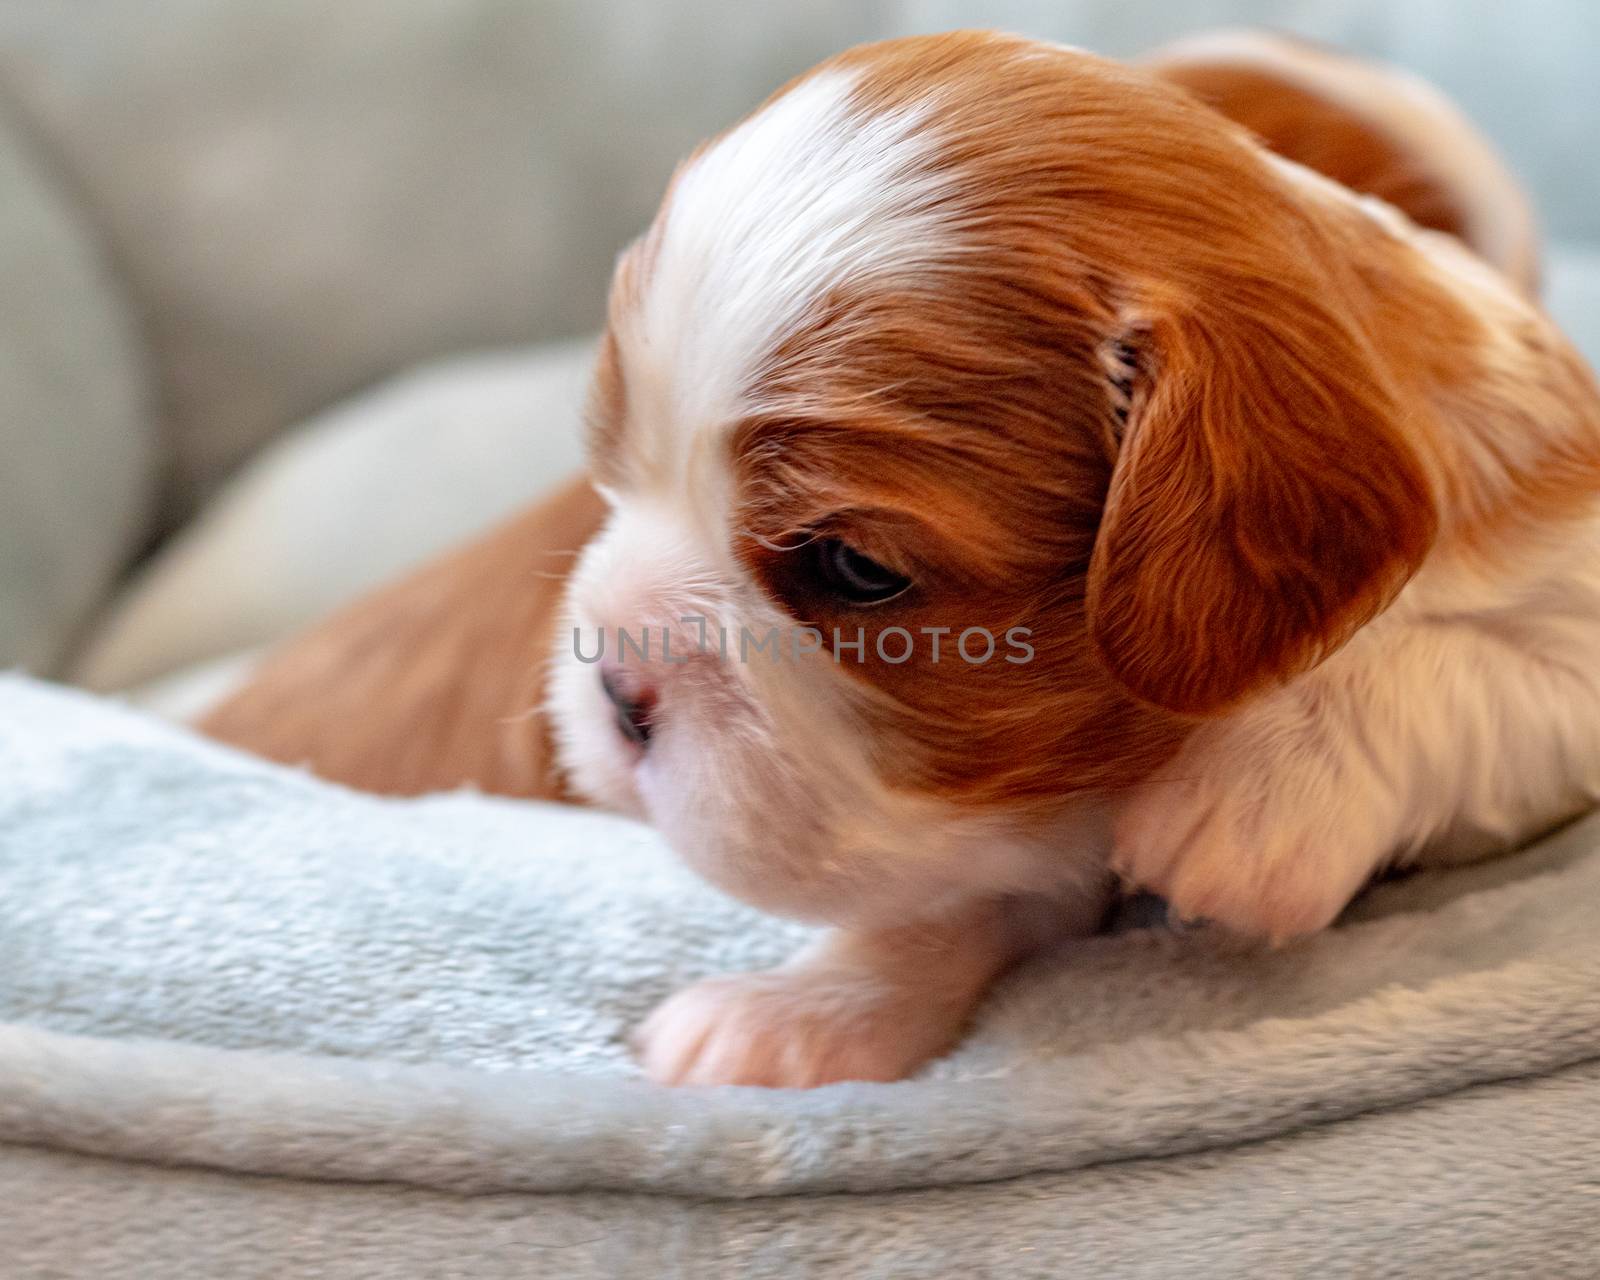 A newborn Cavalier King Charles Spaniel puppy perks its head up as it lies on the edge of a soft dog bed. The puppy has the breed's Blenheim coloring of reddish brown and white.